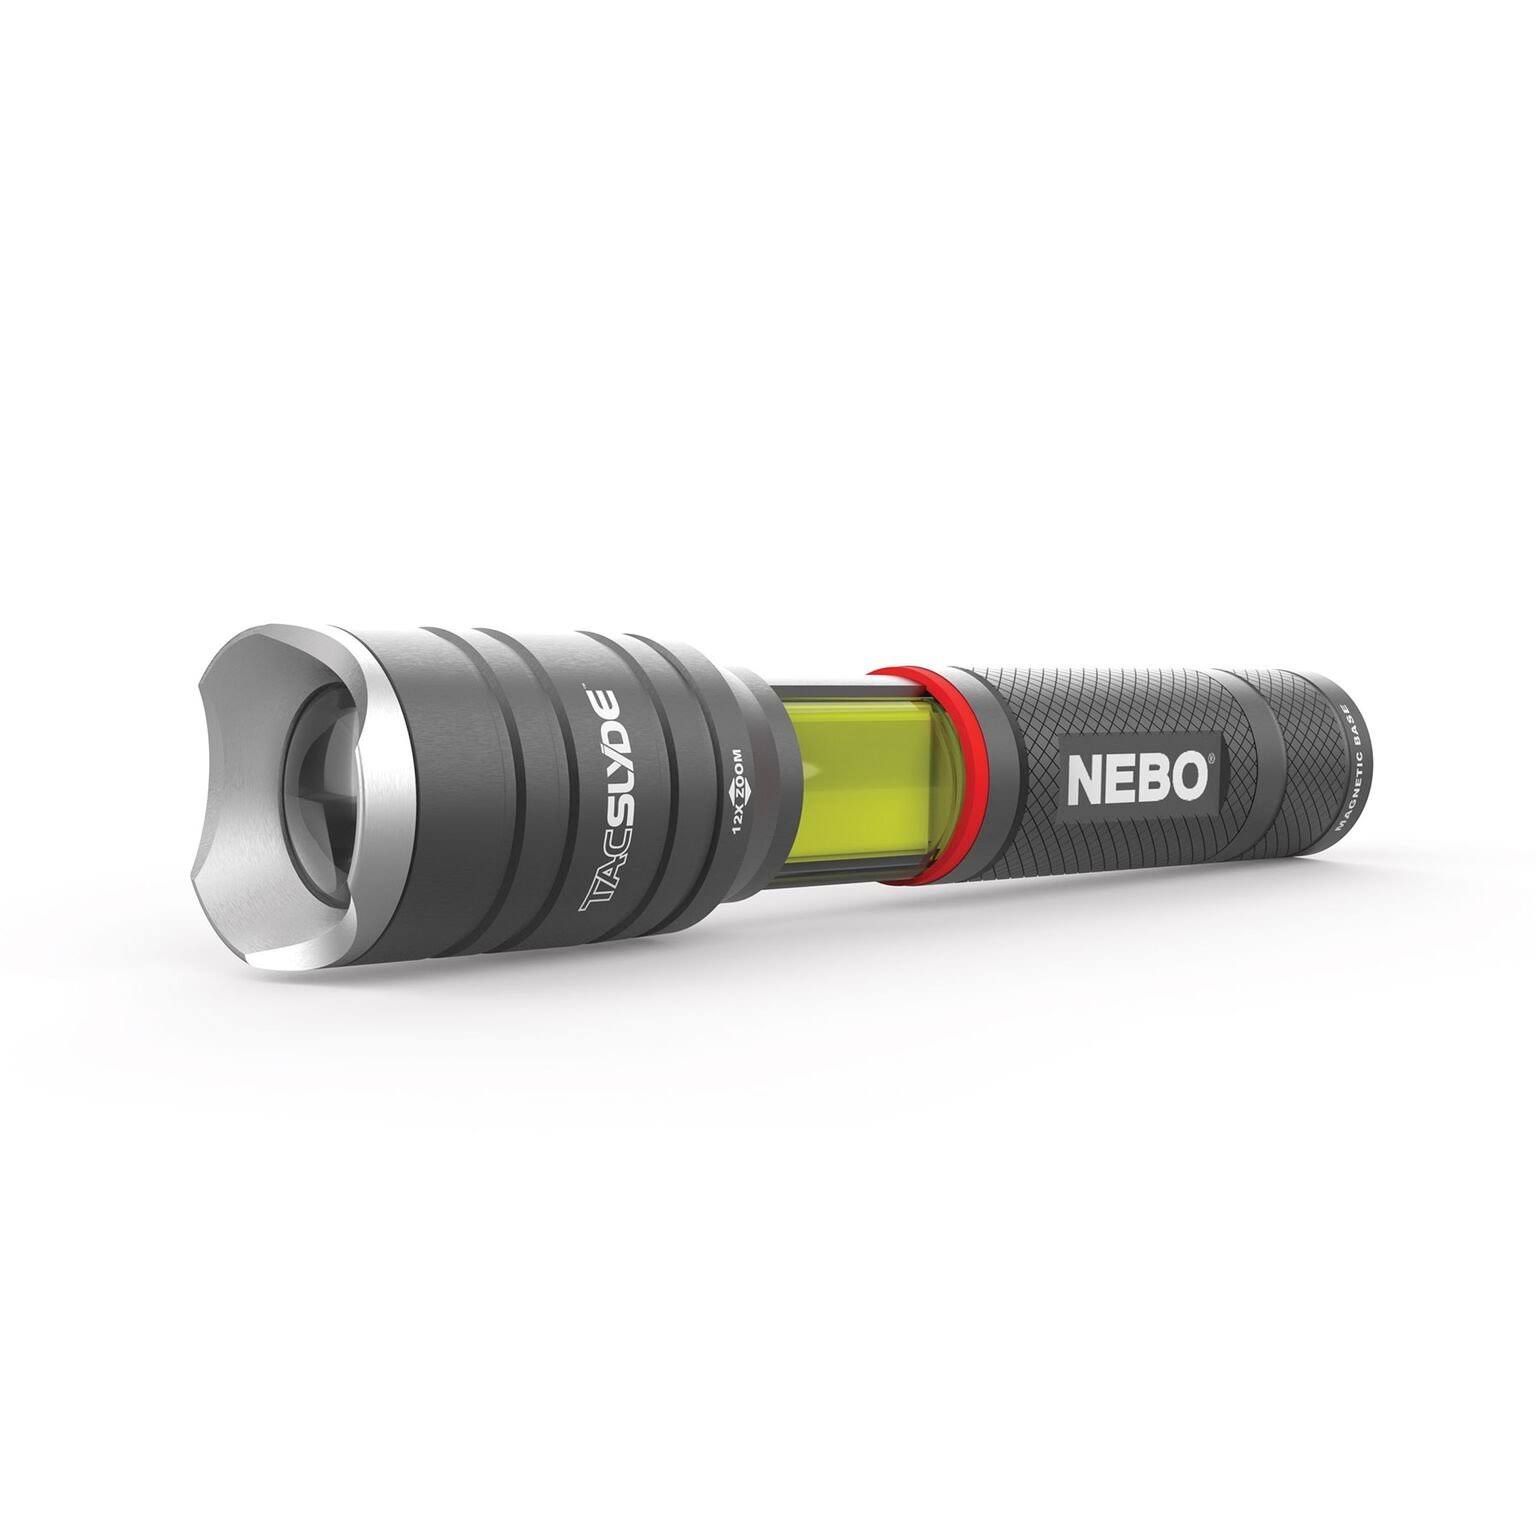 Nebo Tac Slyde LED Flashlight with Work Light and 12x Zoom Lens